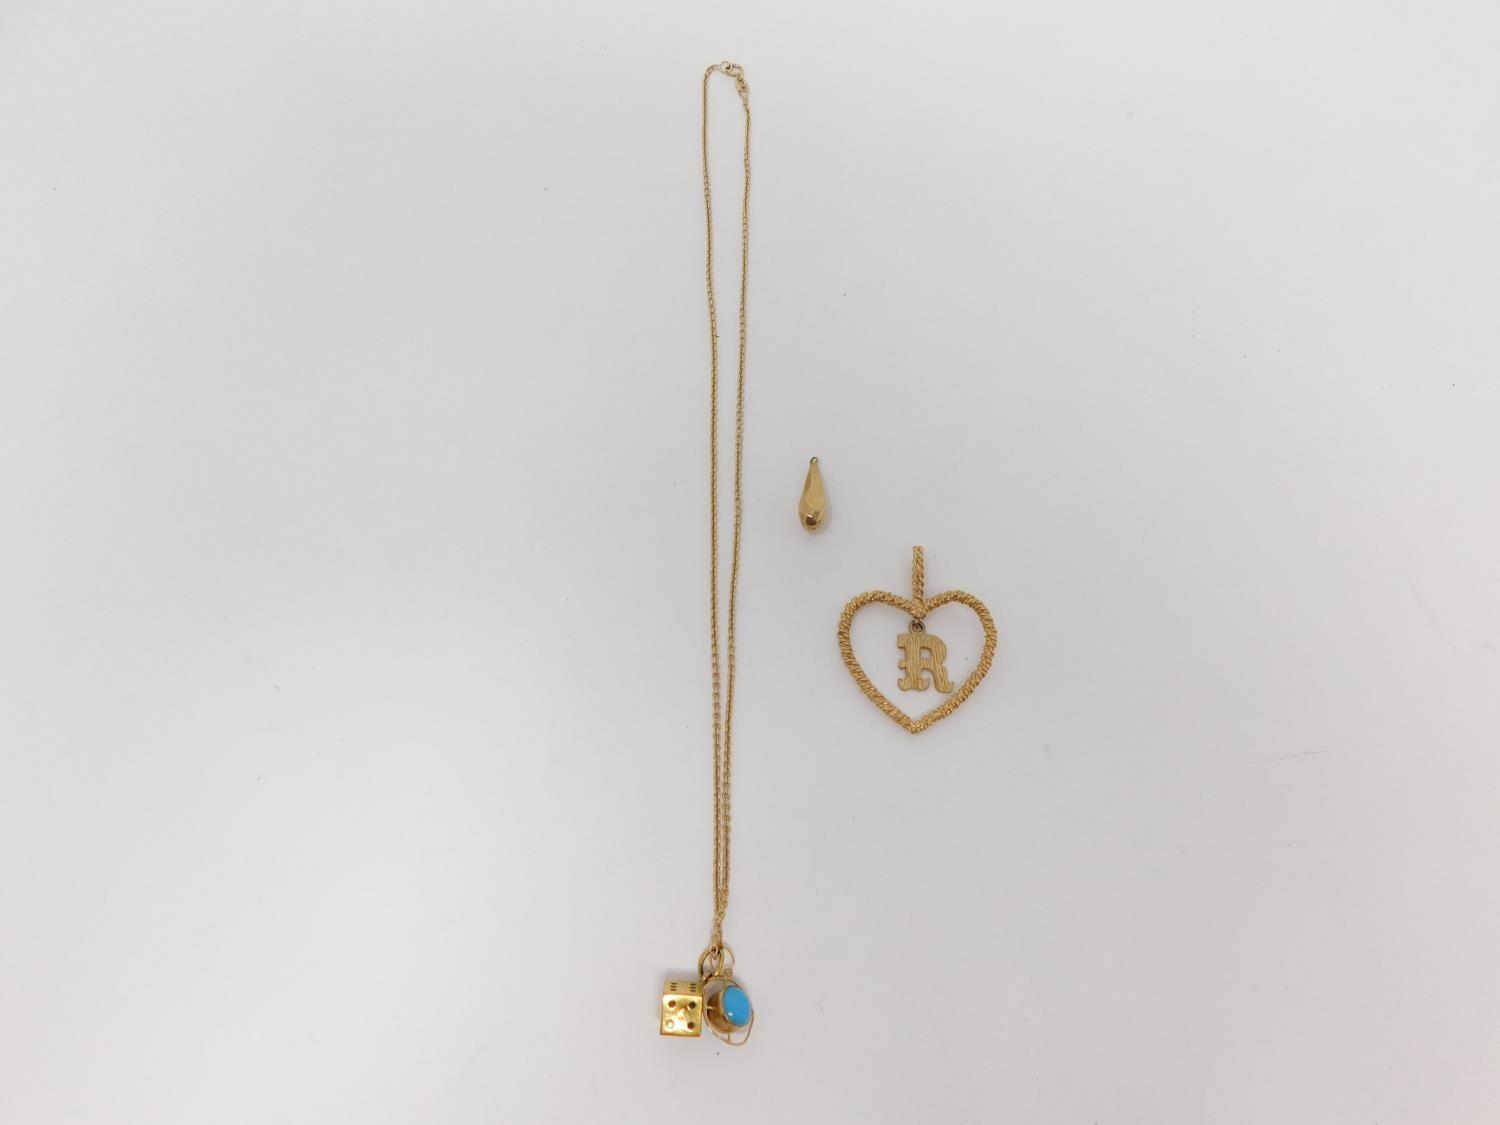 A 9carat gold chain with yellow metal dice charm and three 9 carat gold pendants. One pendant